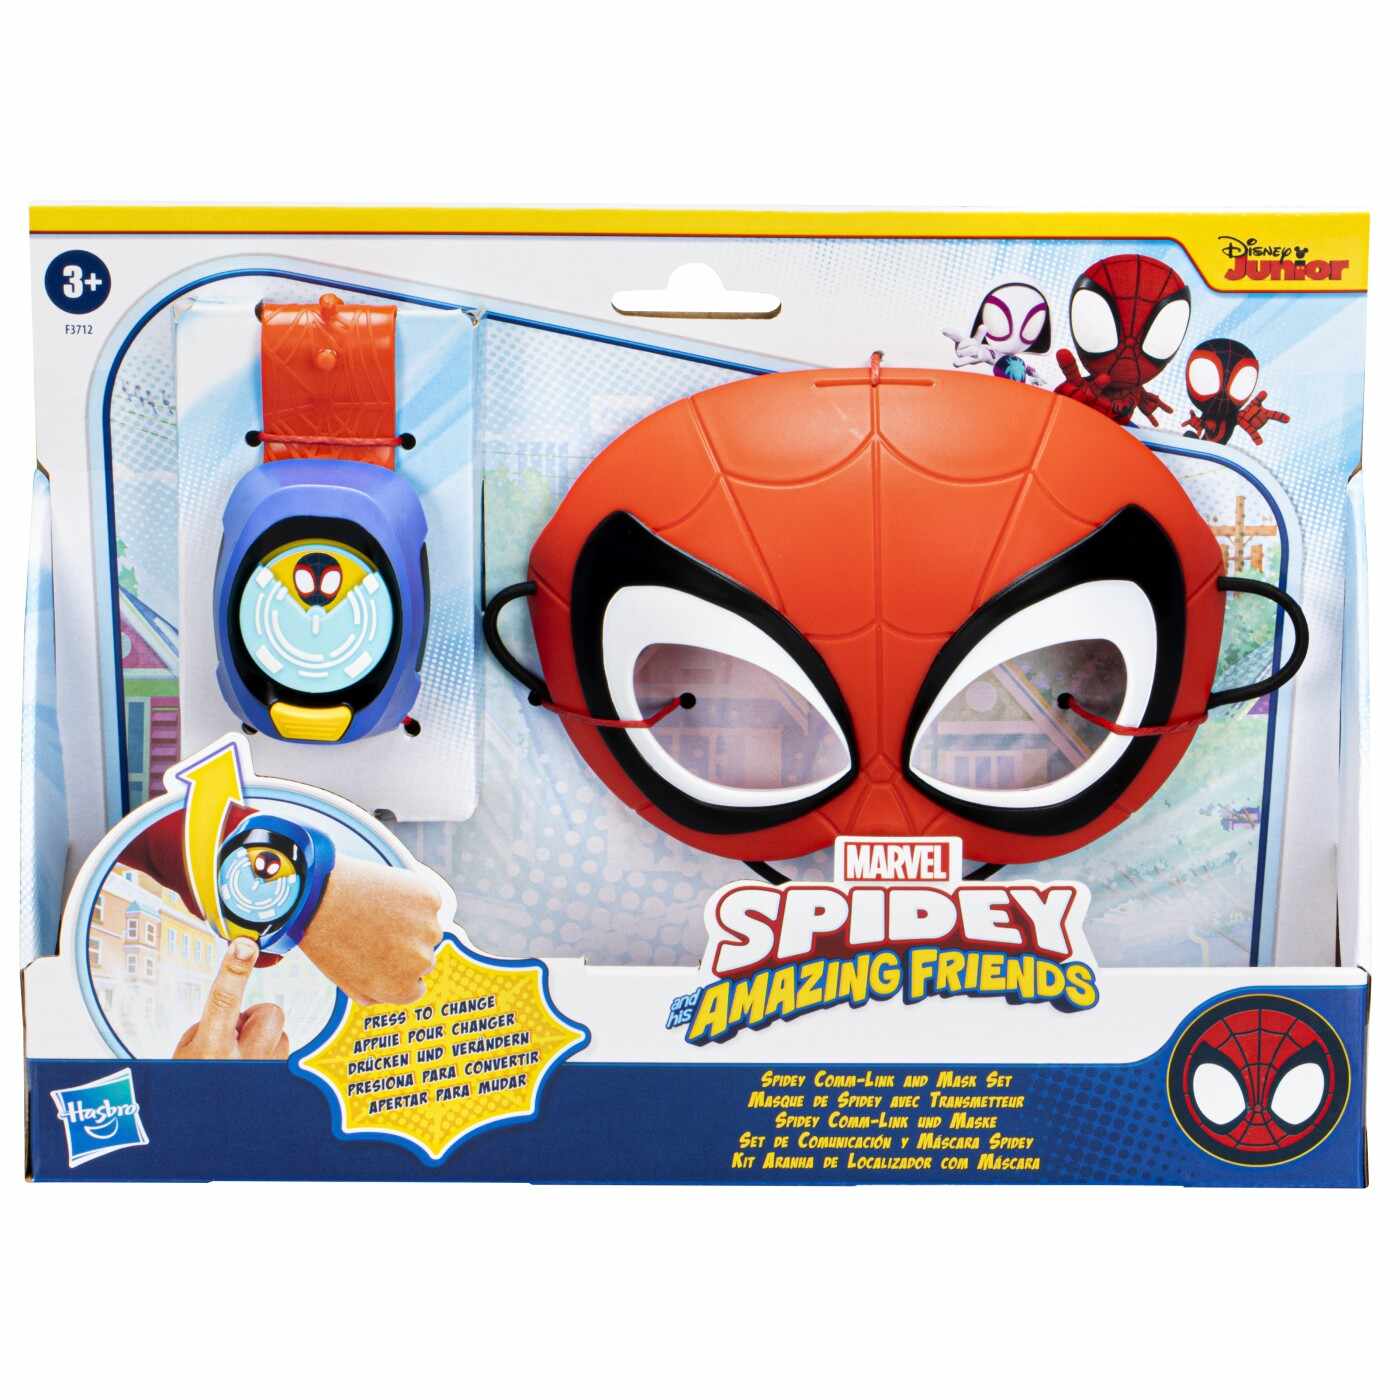 Set de joaca - Spidey And His Amazing Friends - Spidey Comm-Link and Mask Set | Hasbro